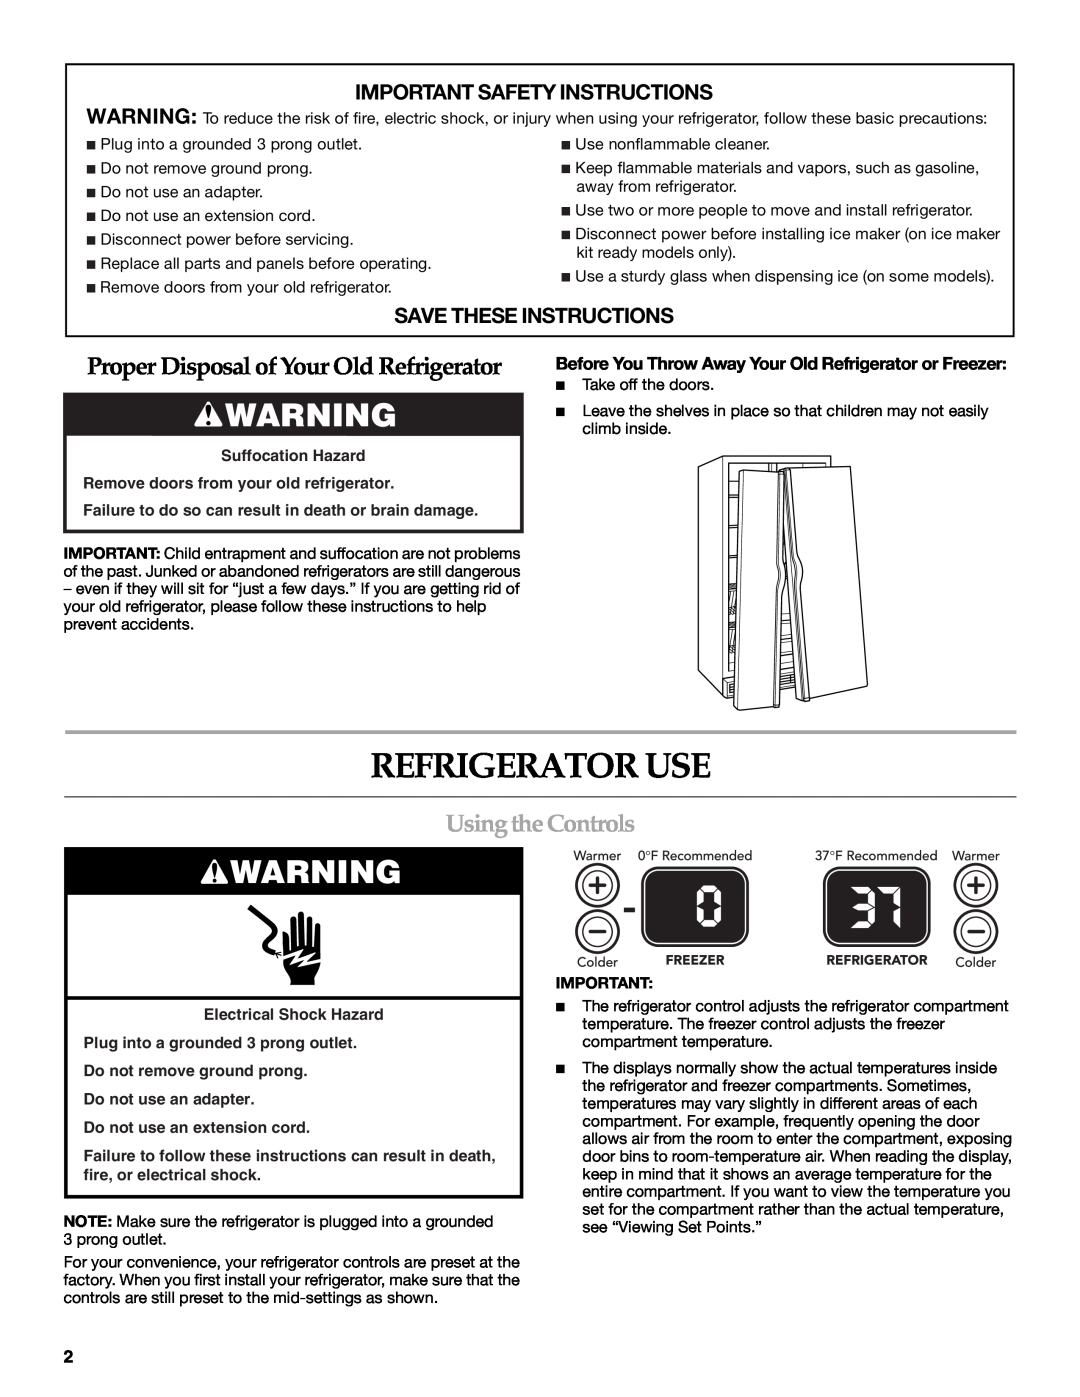 KitchenAid W10162435A warranty Refrigerator Use, Proper Disposal of Your Old Refrigerator, Using the Controls 